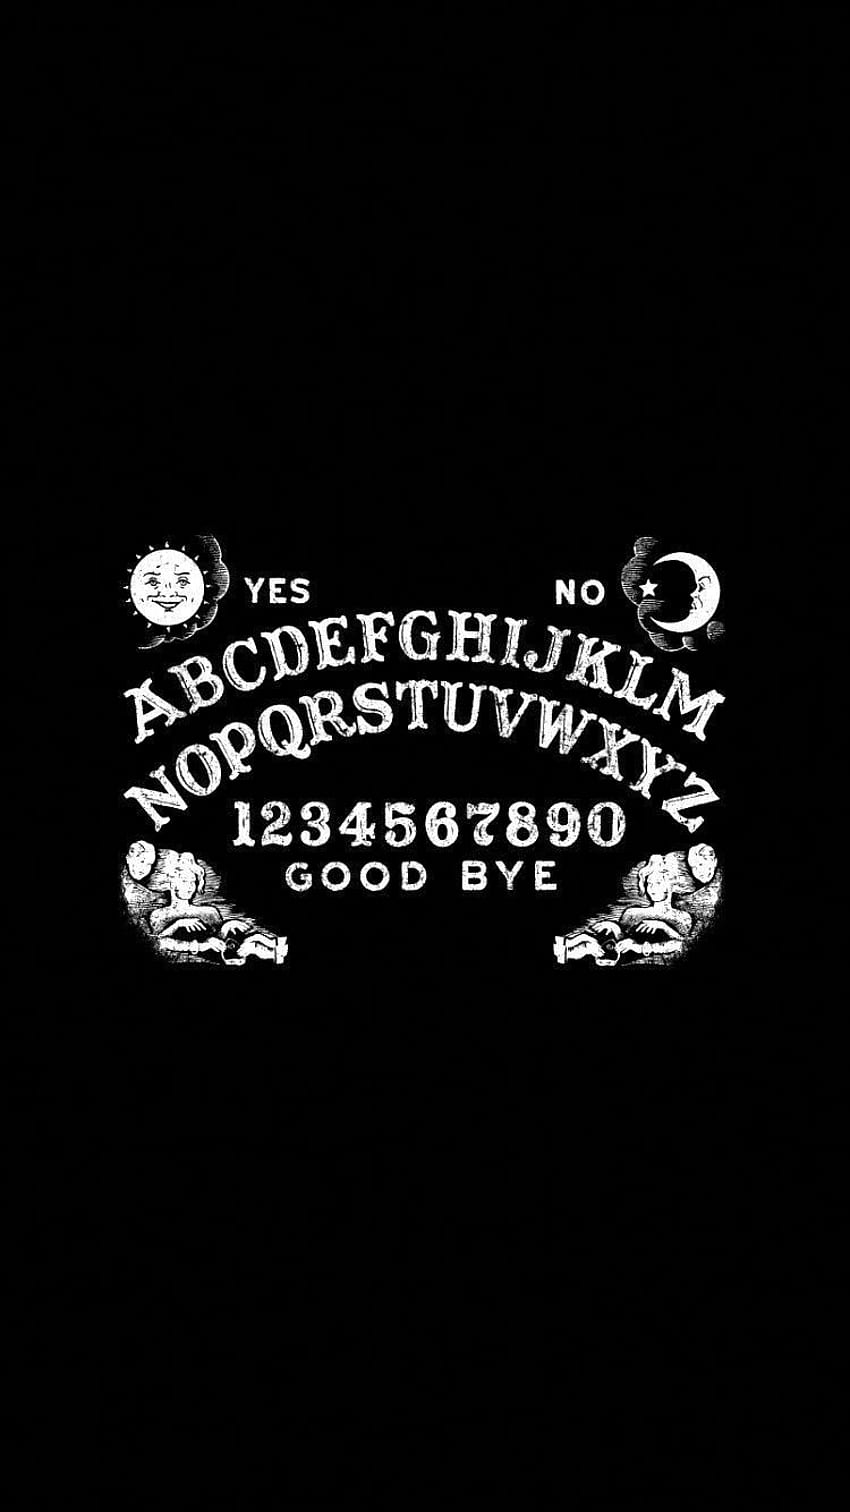 A black and white ouija board with a moon and star design - Horror